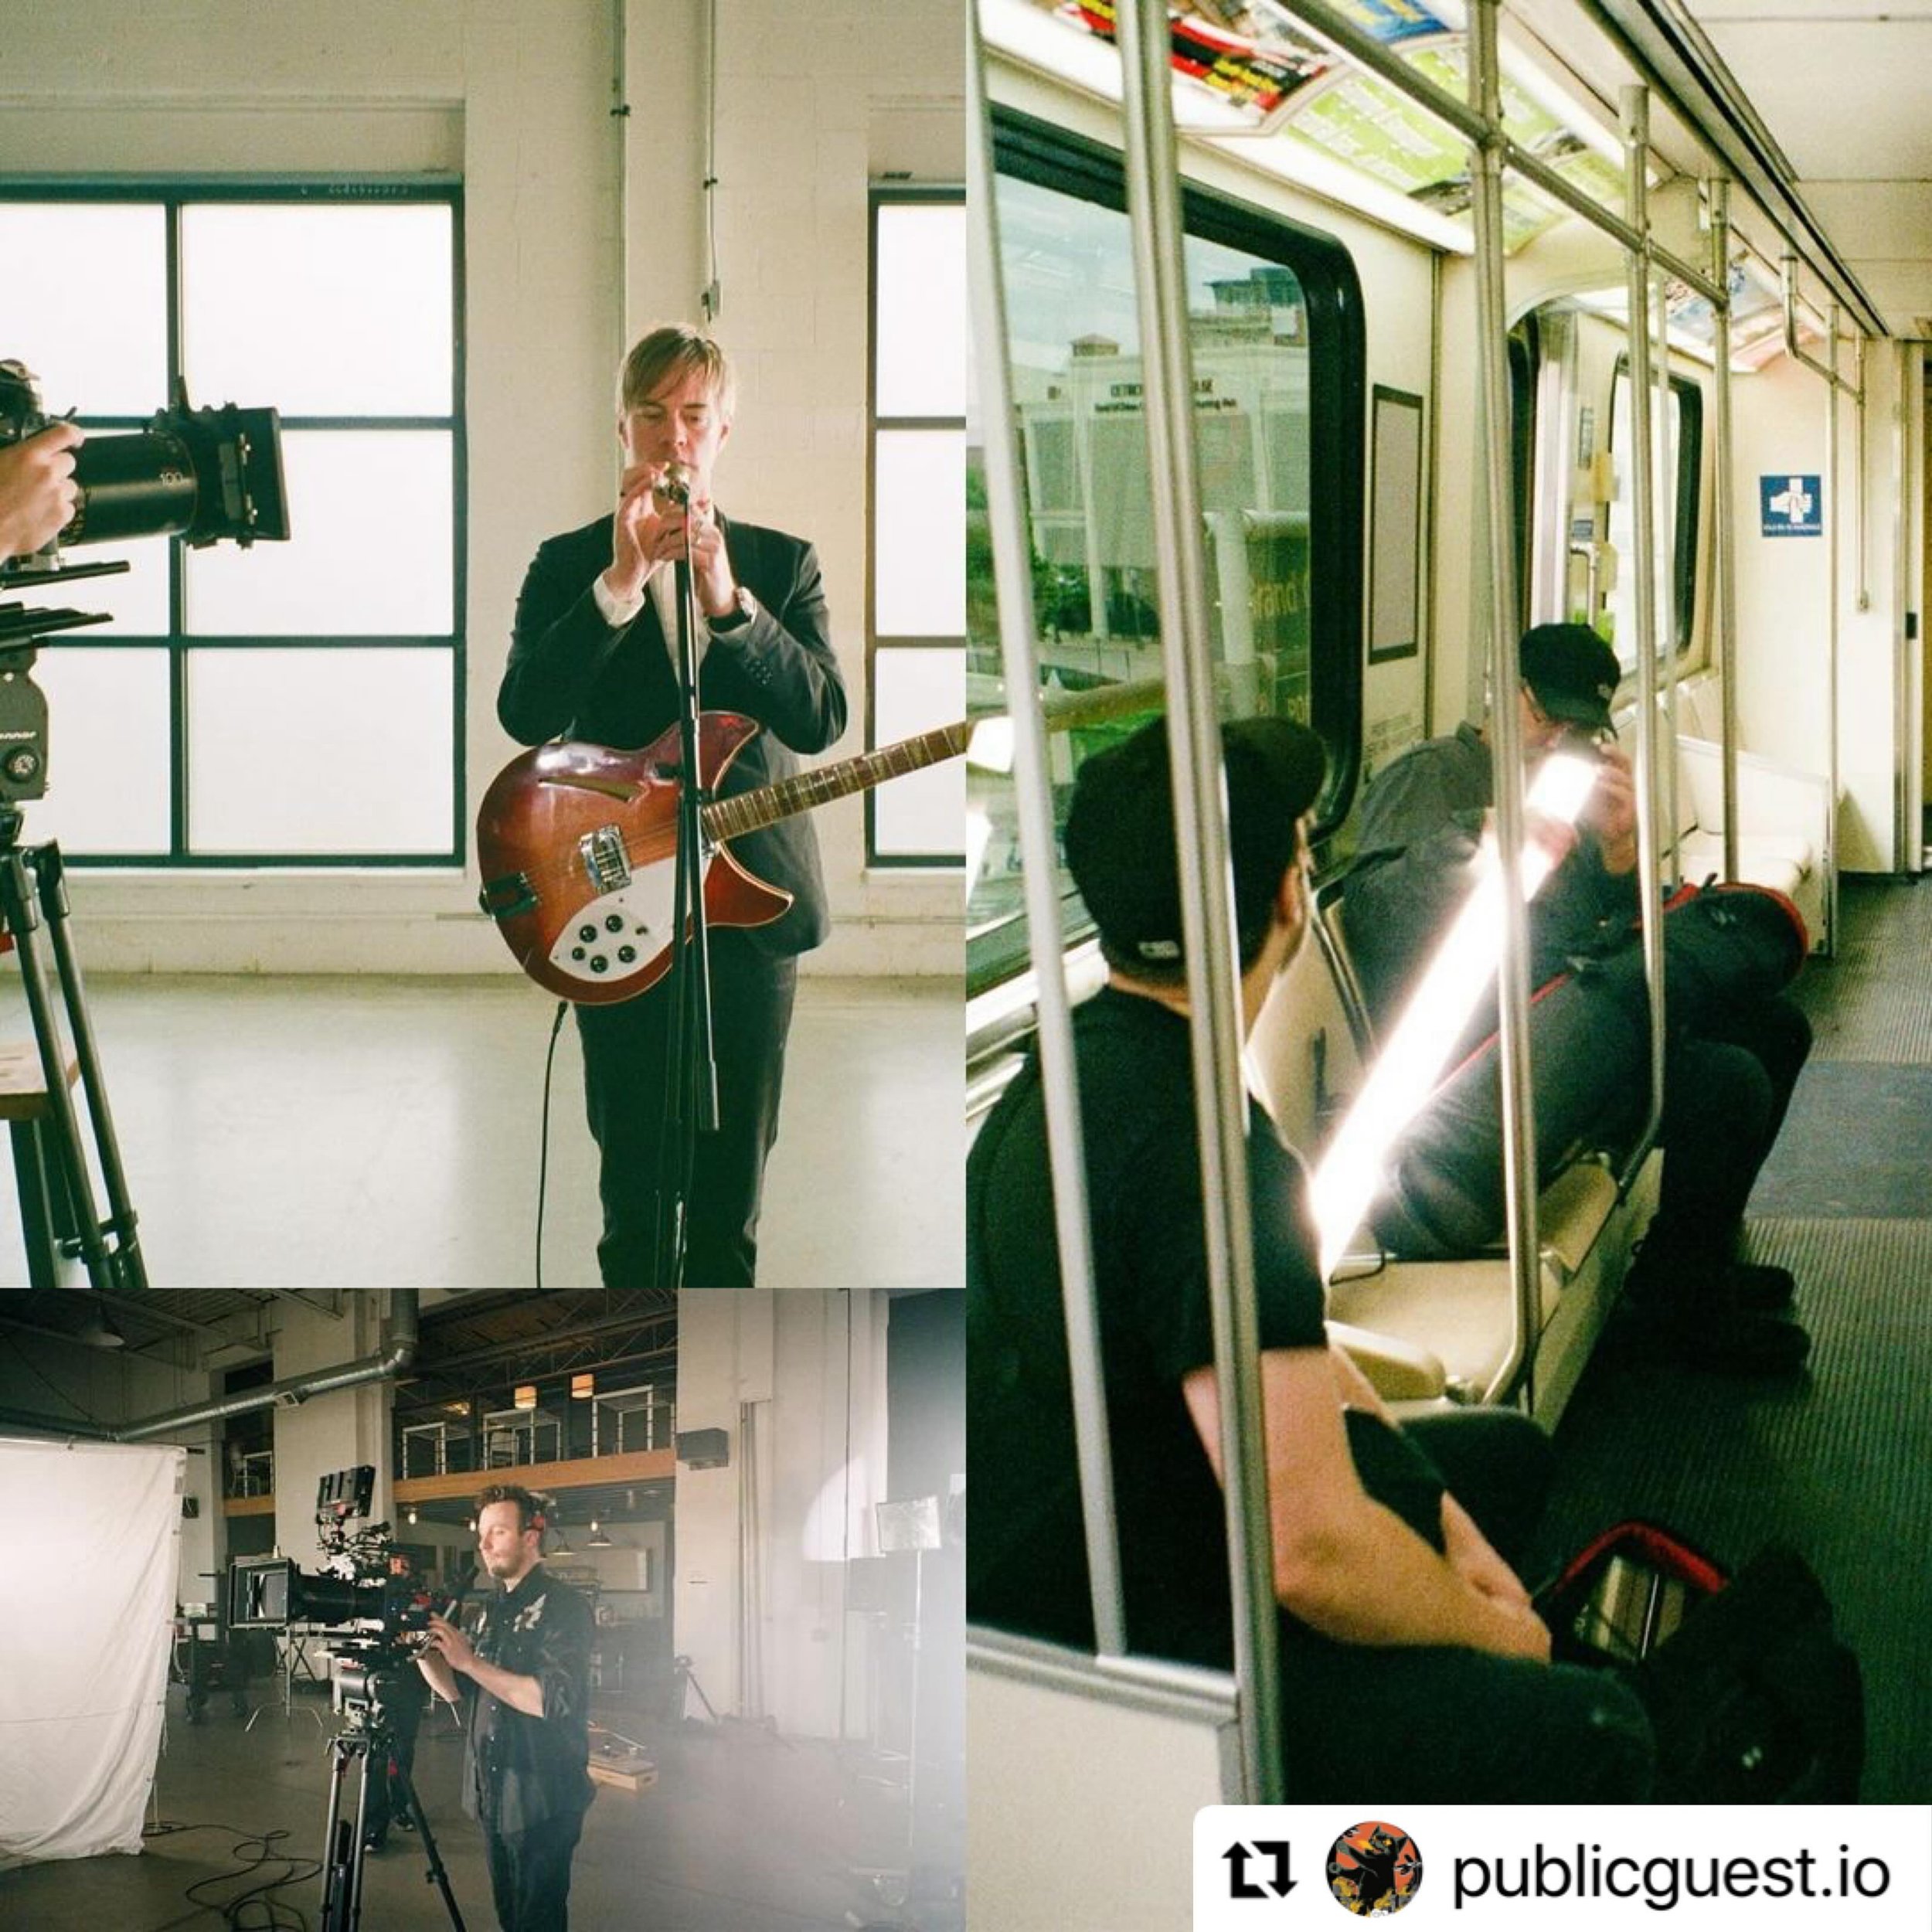 #Repost @publicguest.io
・・・
Some new 35mm film stills captured during the making of The Ocean Blue&rsquo;s &ldquo;Denmark&rdquo; music video. 

@theoceanblue 

📸 Fujifilm Natura Black 35mm
Developing &amp; Scans by @gelatinlabs 
.
.
#behindthescenes